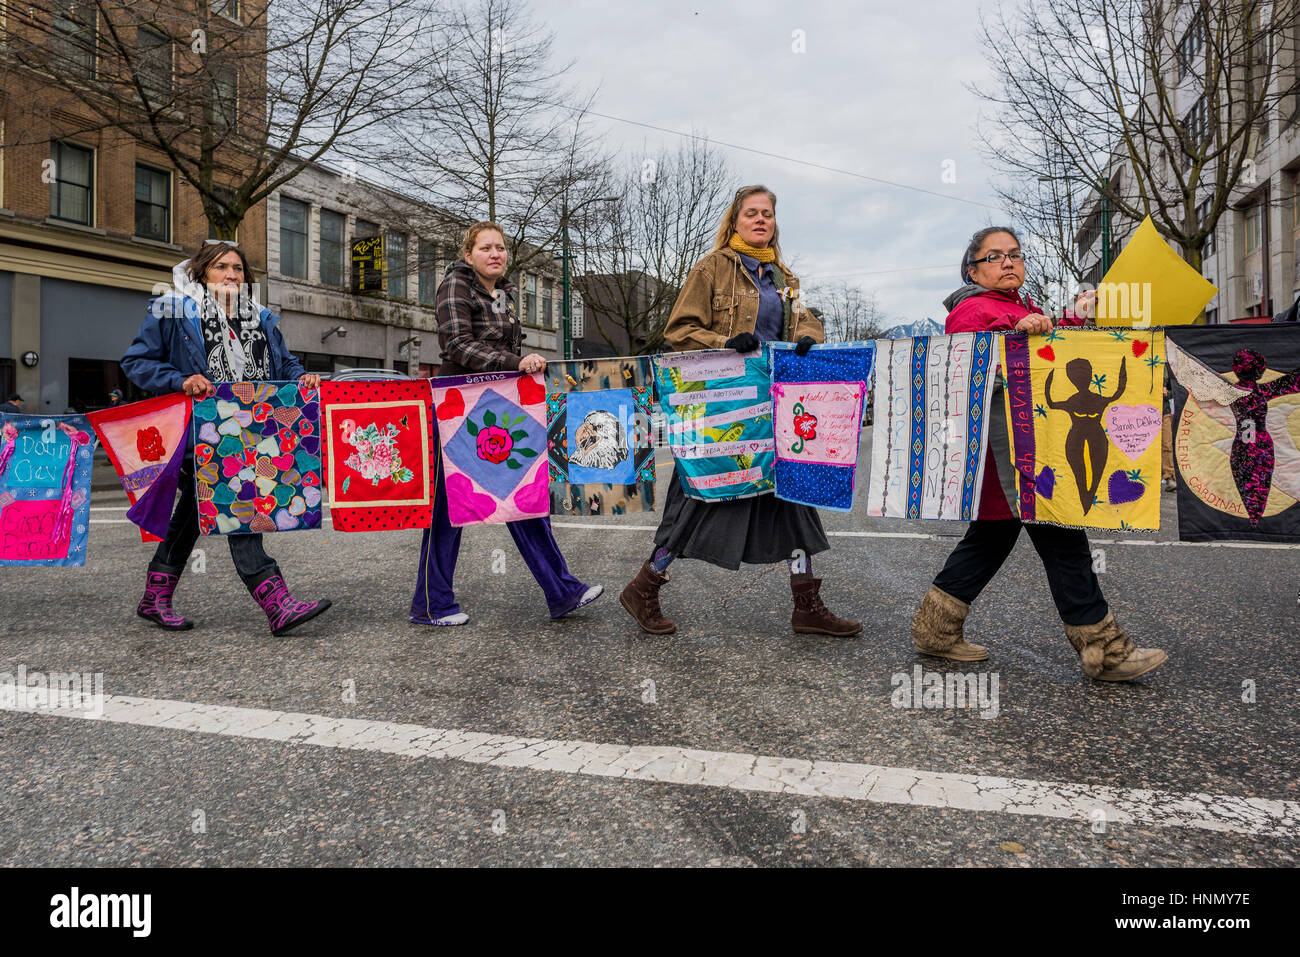 Downtown Eastside Women's Memorial march, Vancouver, British Columbia, Canada. Credit: Michael Wheatley/Alamy Live News Stock Photo